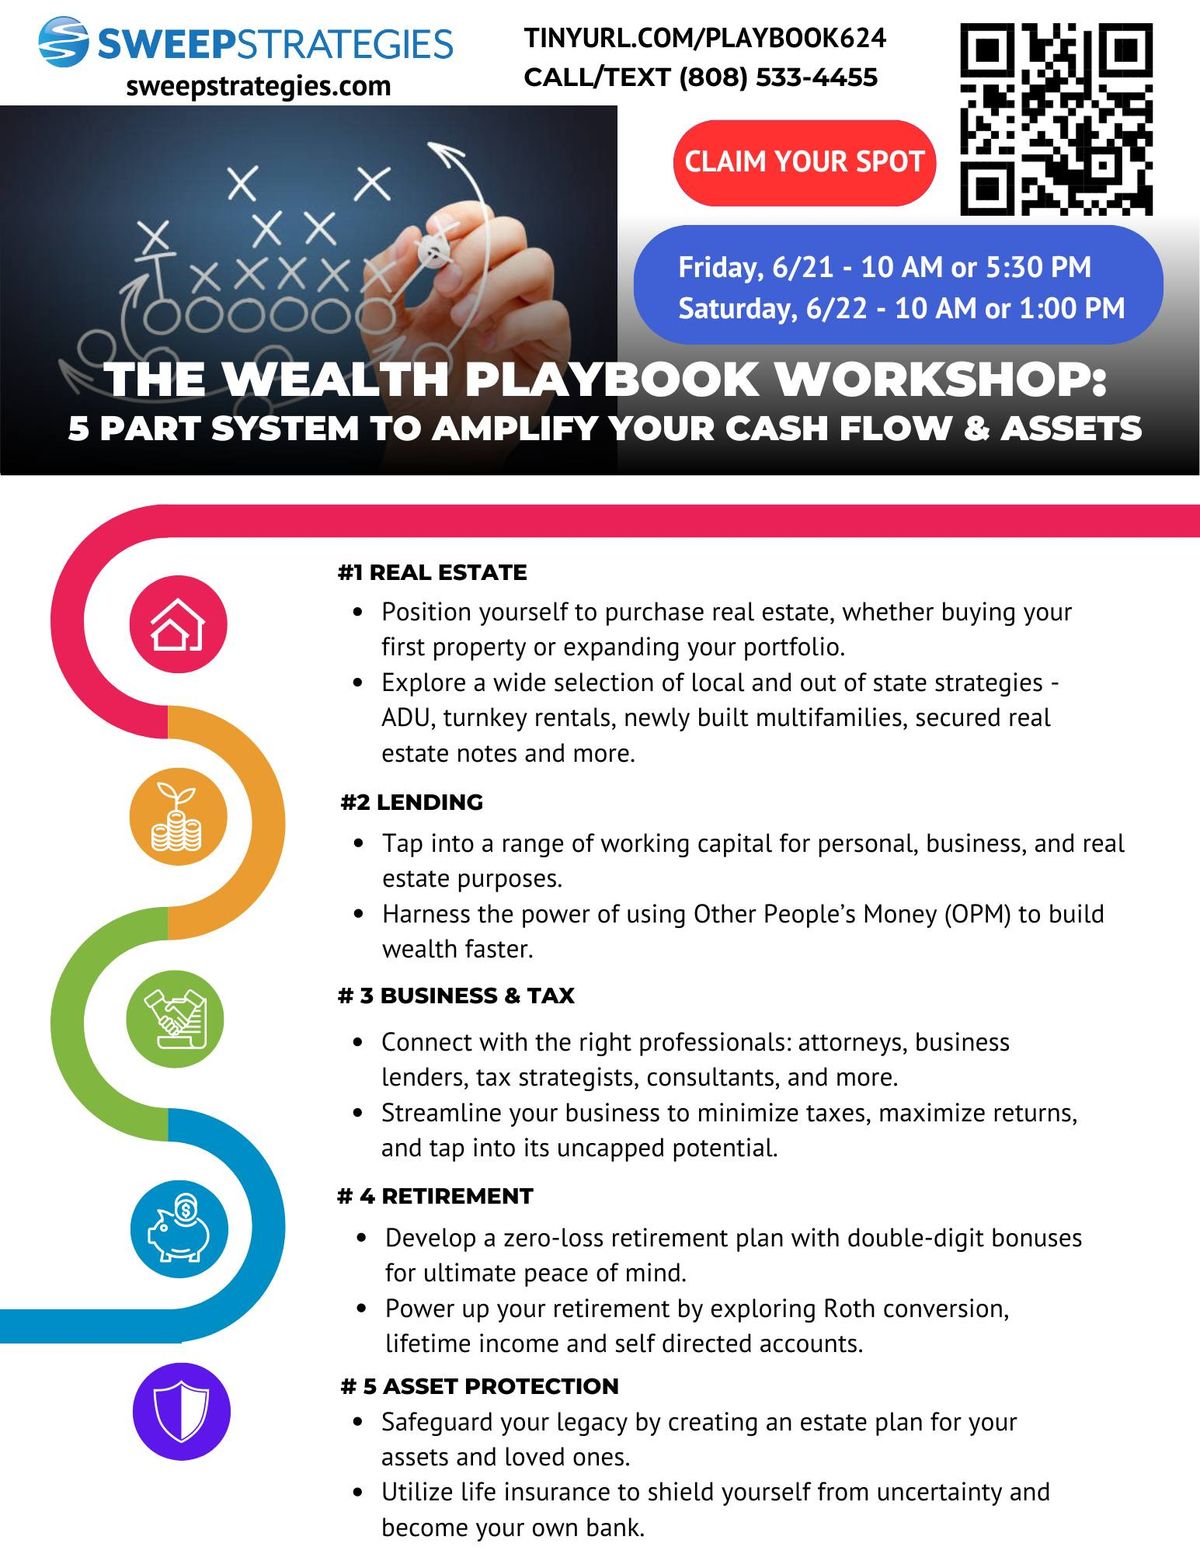 Join the Experts at the In-Person Wealth Playbook Workshop at 10AM